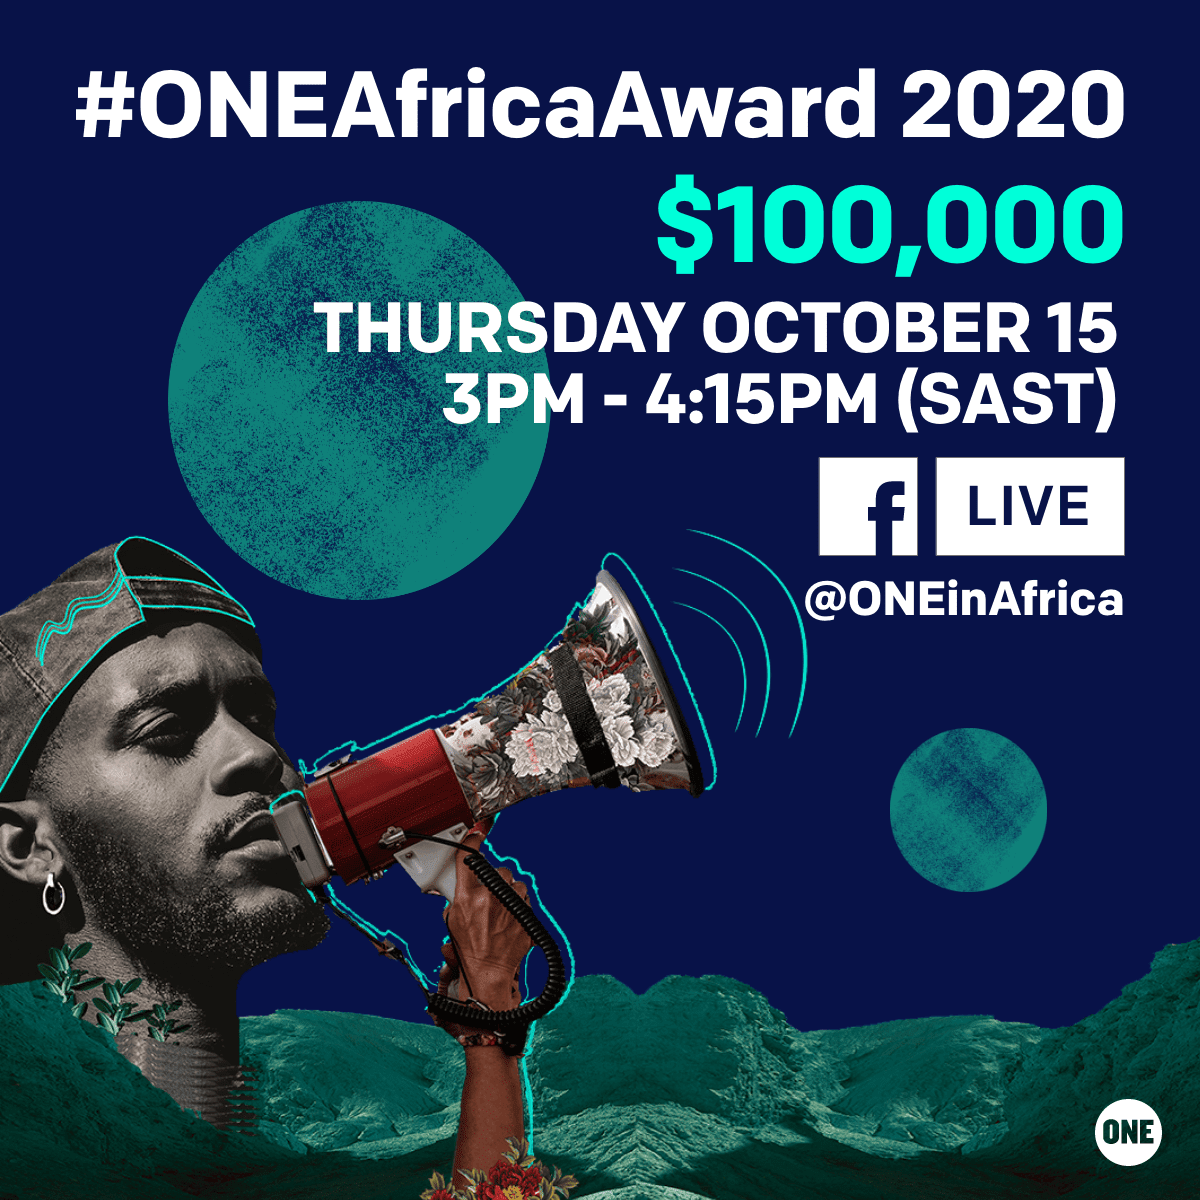 We voted and now its time to find out who the winner of the ONE Africa award is! Join us for the official announcement of #OneAfricaAward winner via Facebook live (go.one.org/3lJcs5y) at 3 p.m. (SAST) / 4 p.m. (EAT). 

#OneAfricaAwardFinalist🙏